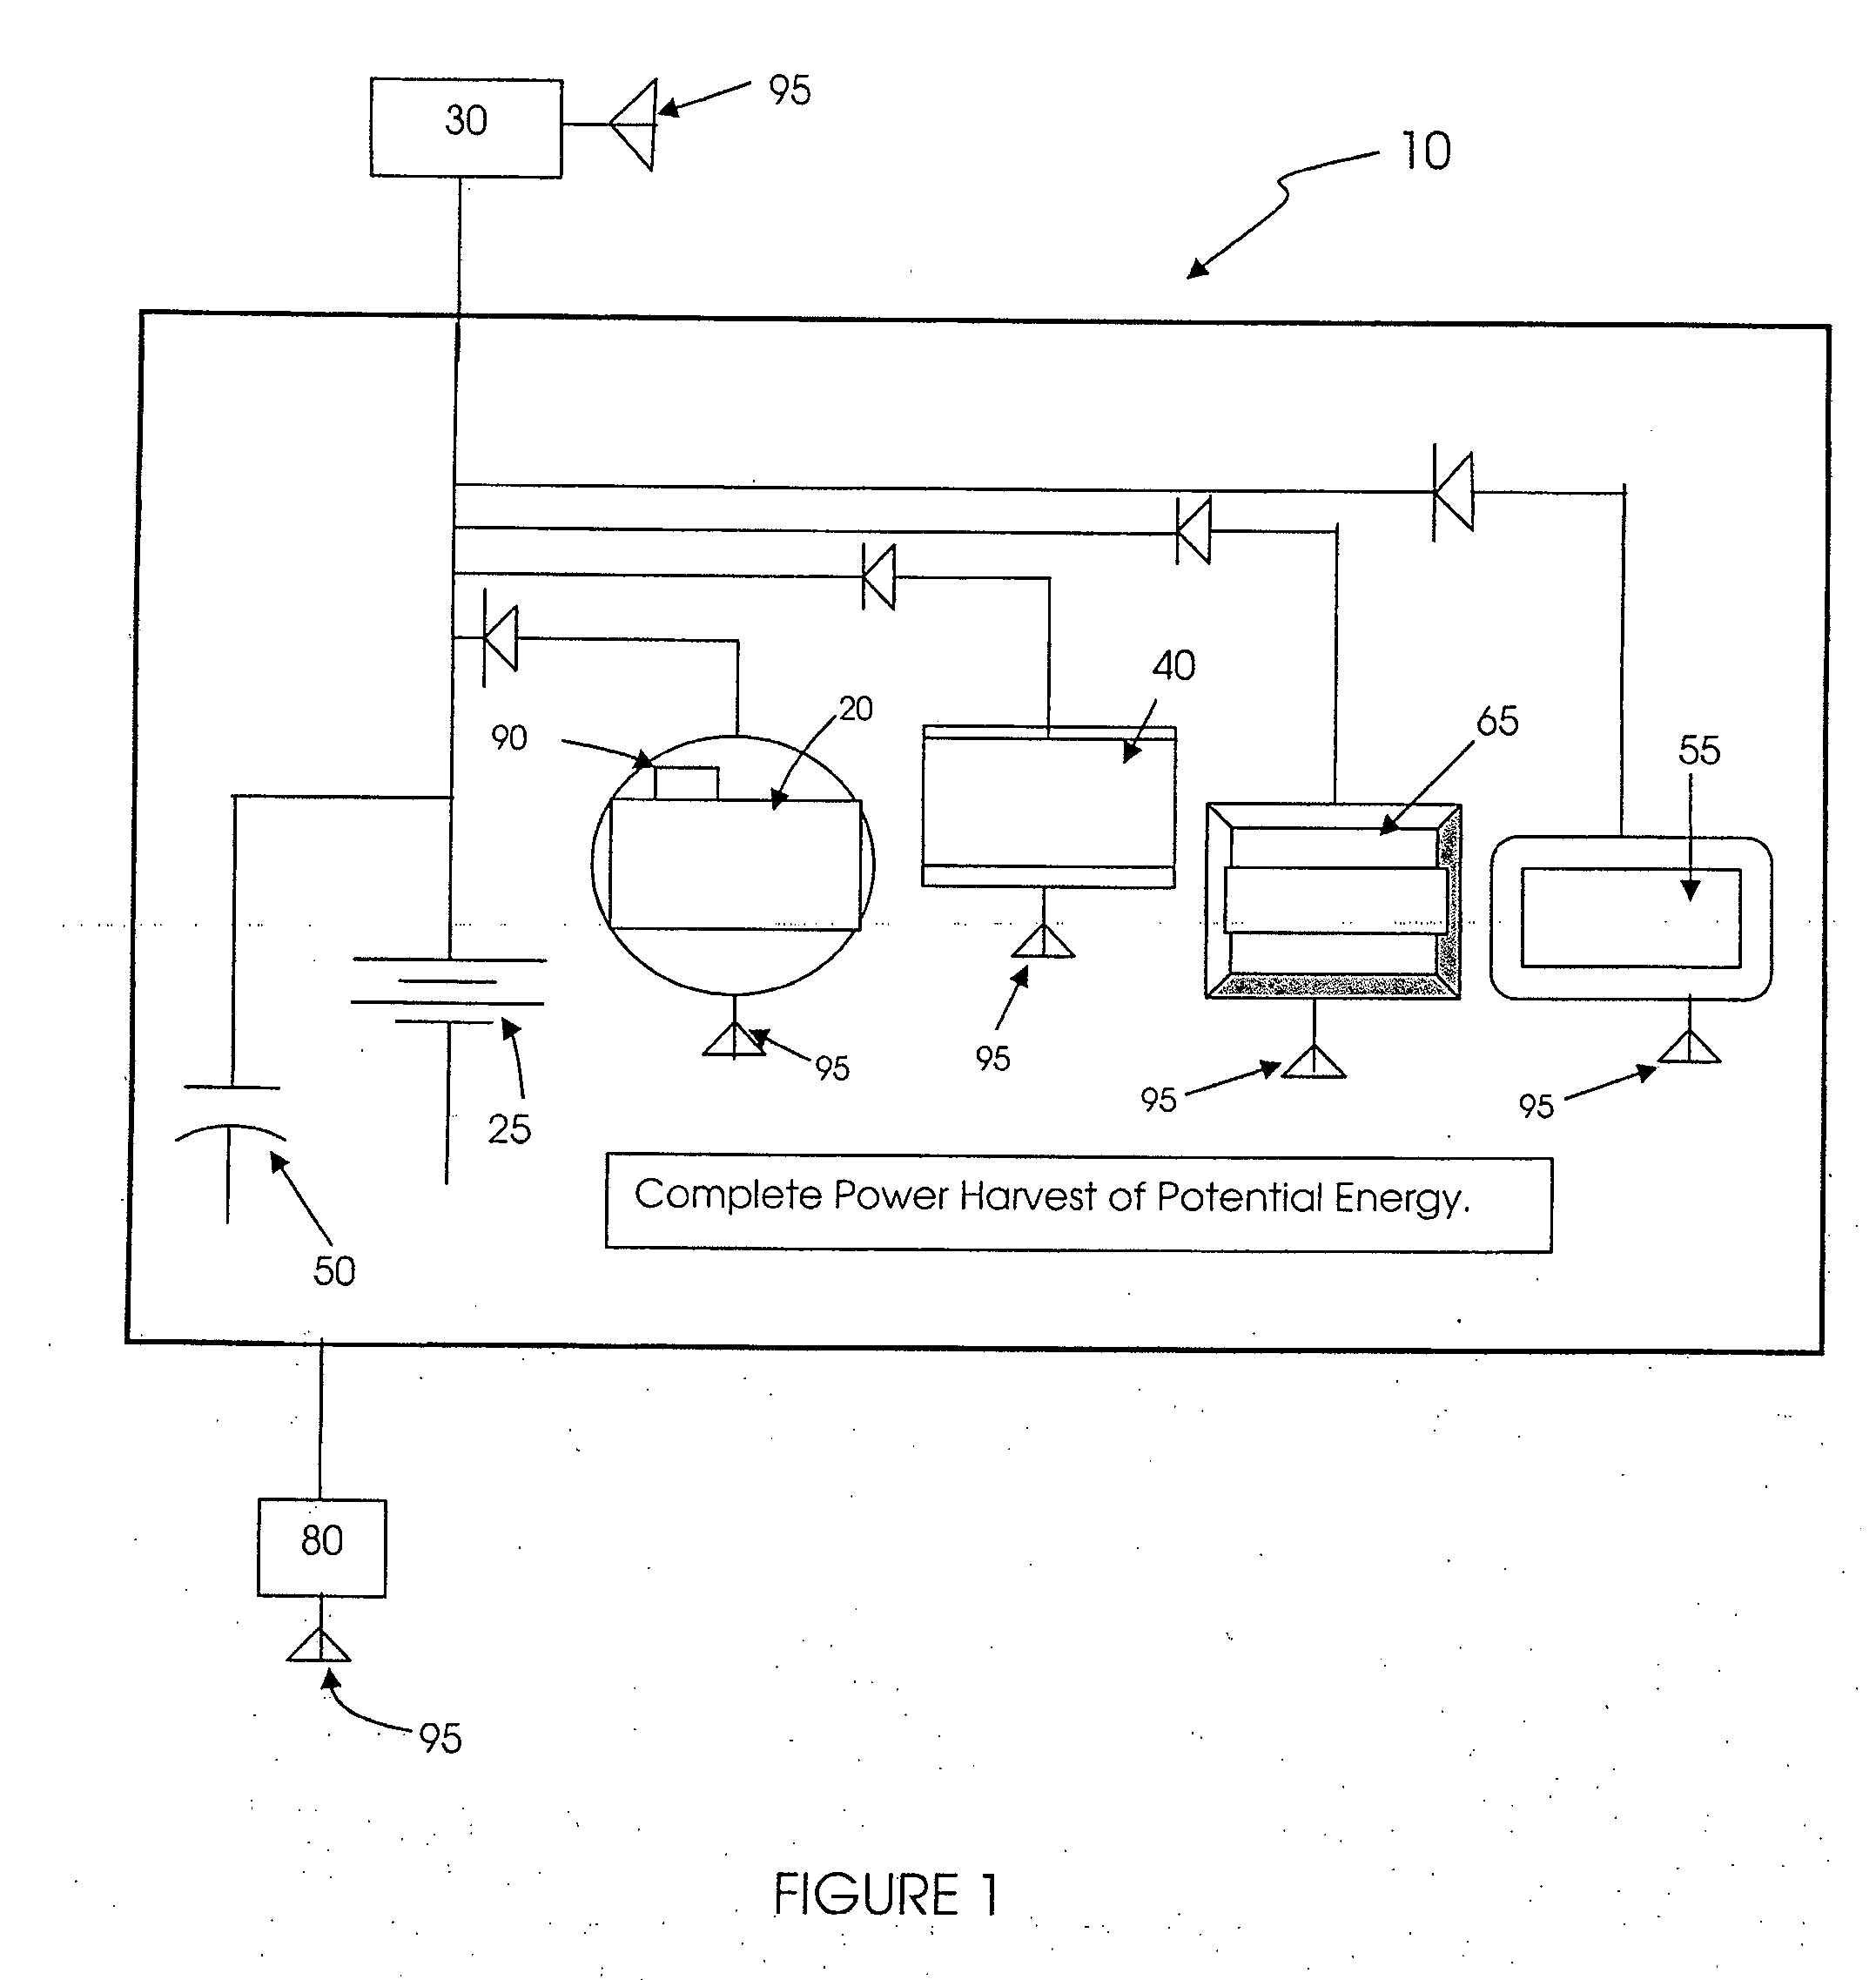 Imbedded intelligent water and device monitoring system